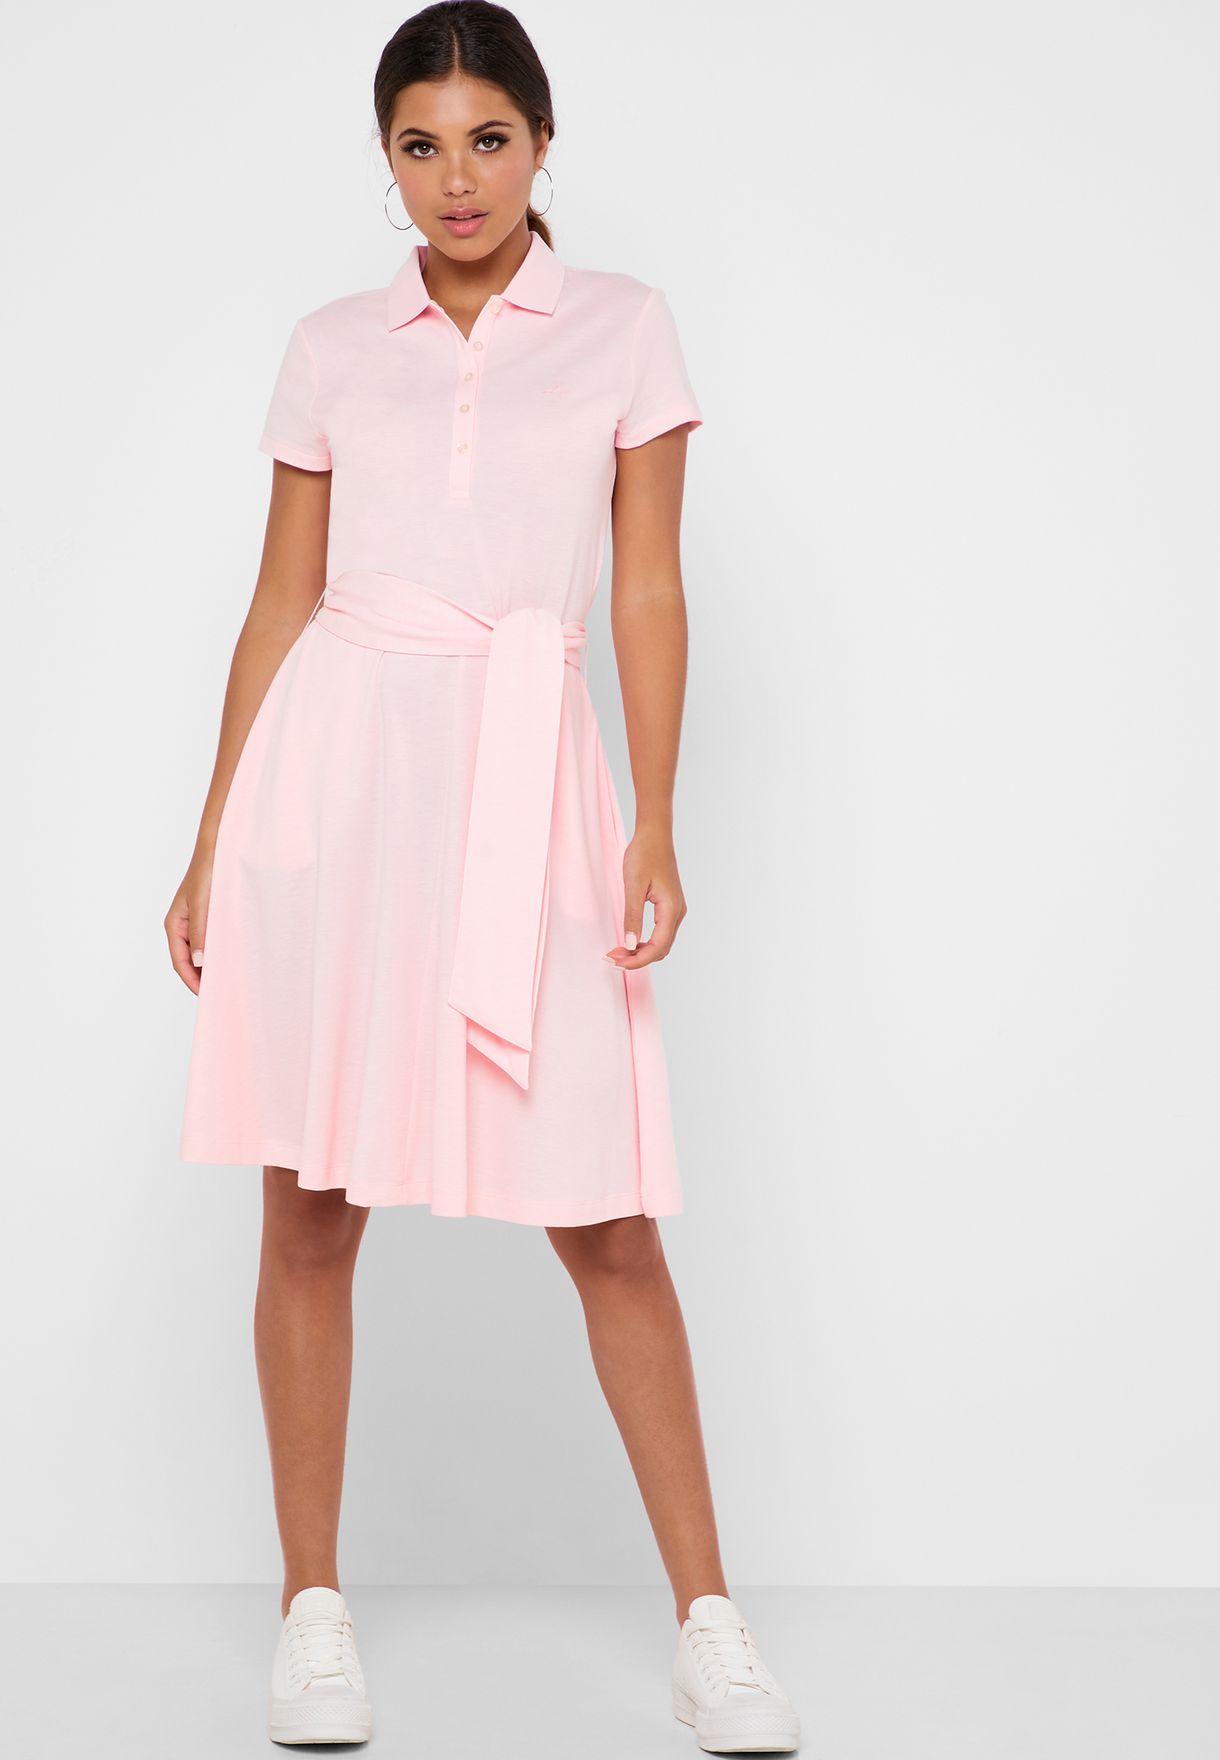 pink and white polo dress